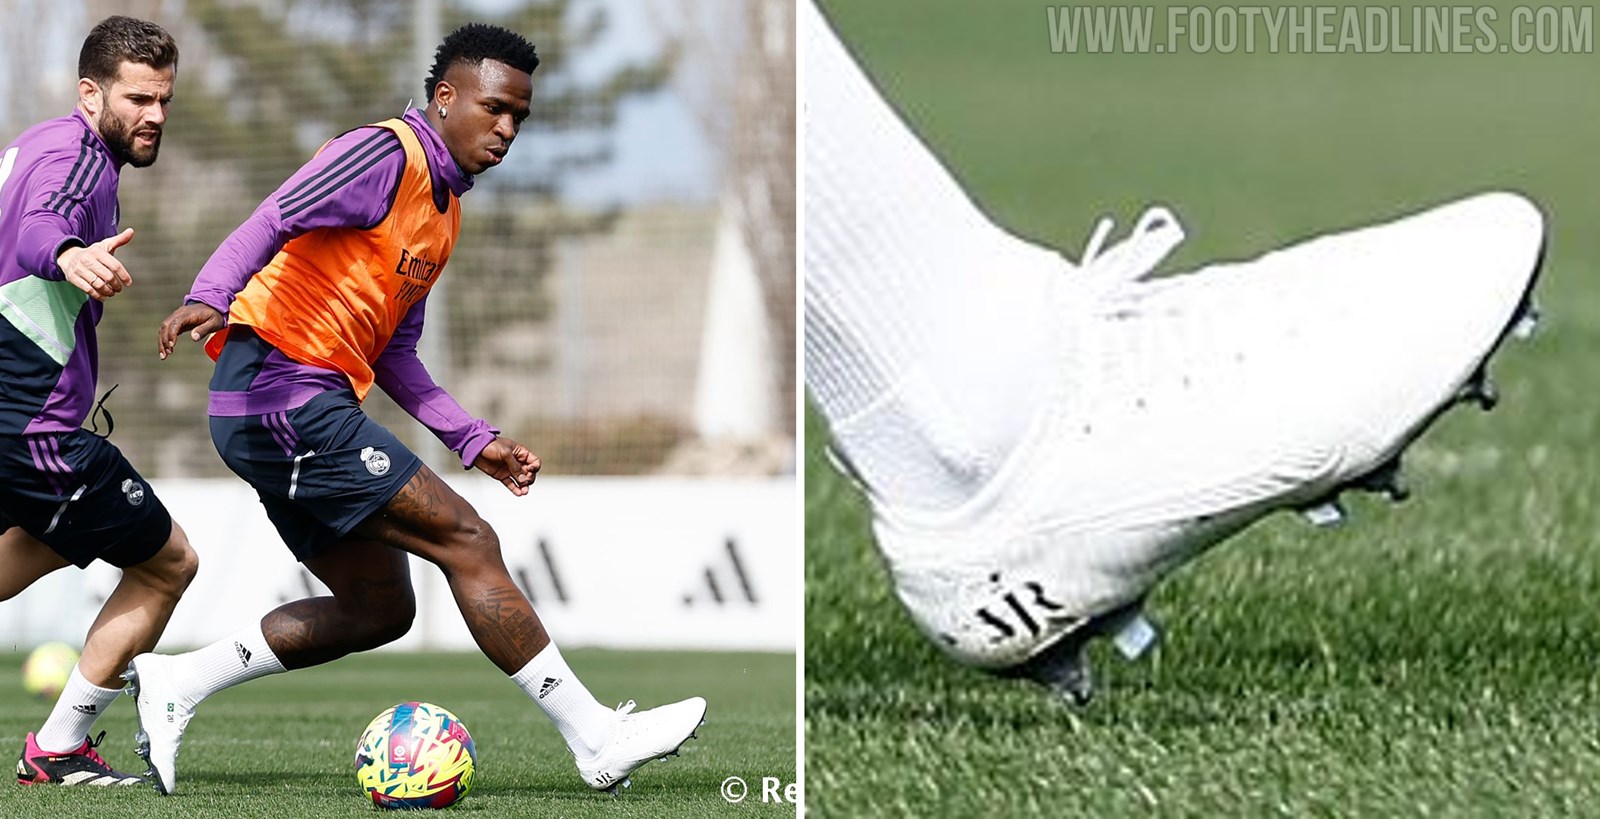 Vinicius Jr Trains in Total White Boots - Wants to Terminate Nike Deal -  Footy Headlines